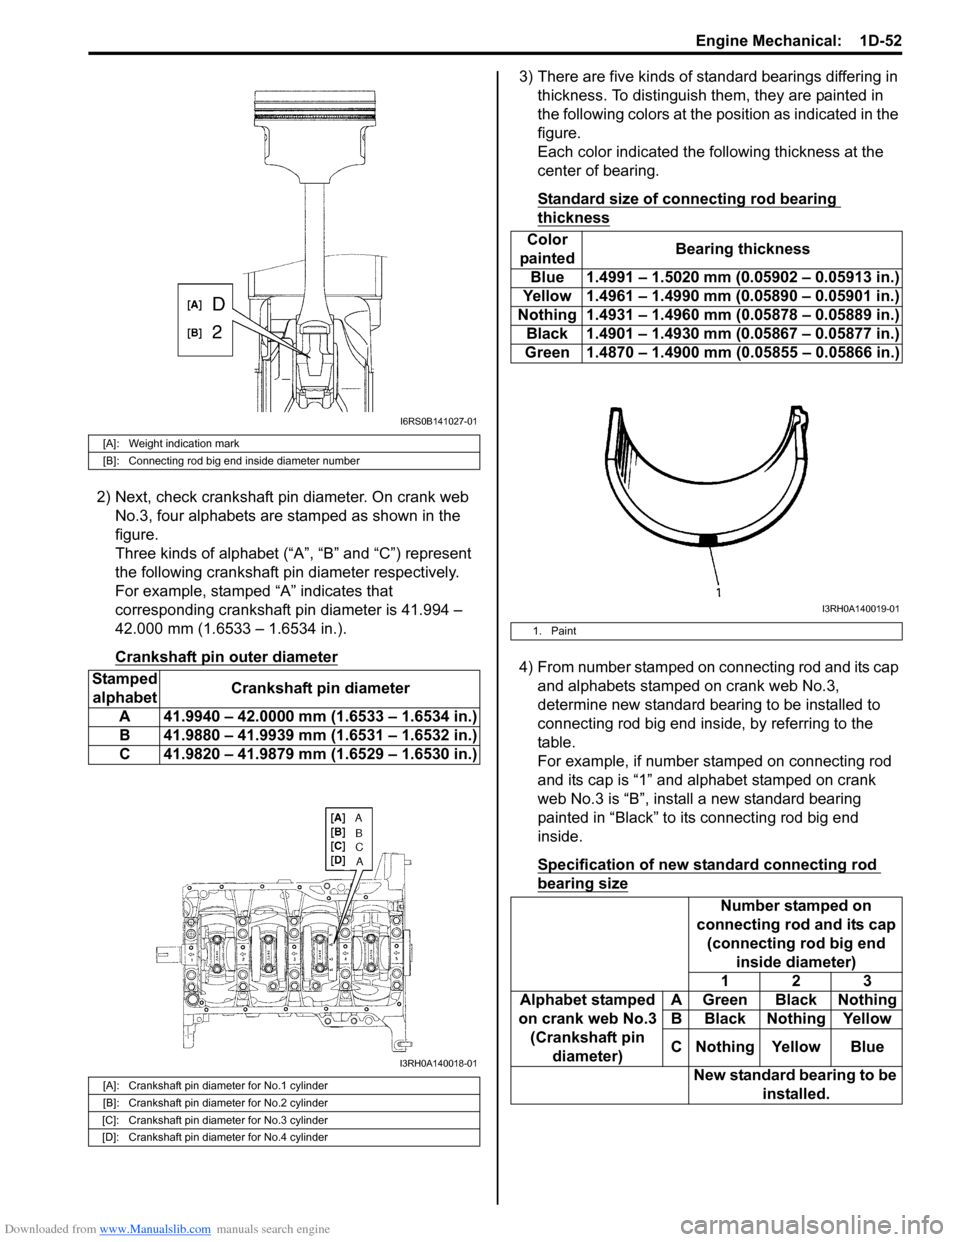 SUZUKI SWIFT 2007 2.G Service Workshop Manual Downloaded from www.Manualslib.com manuals search engine Engine Mechanical:  1D-52
2) Next, check crankshaft pin diameter. On crank web No.3, four alphabets are stamped as shown in the 
figure.
Three 